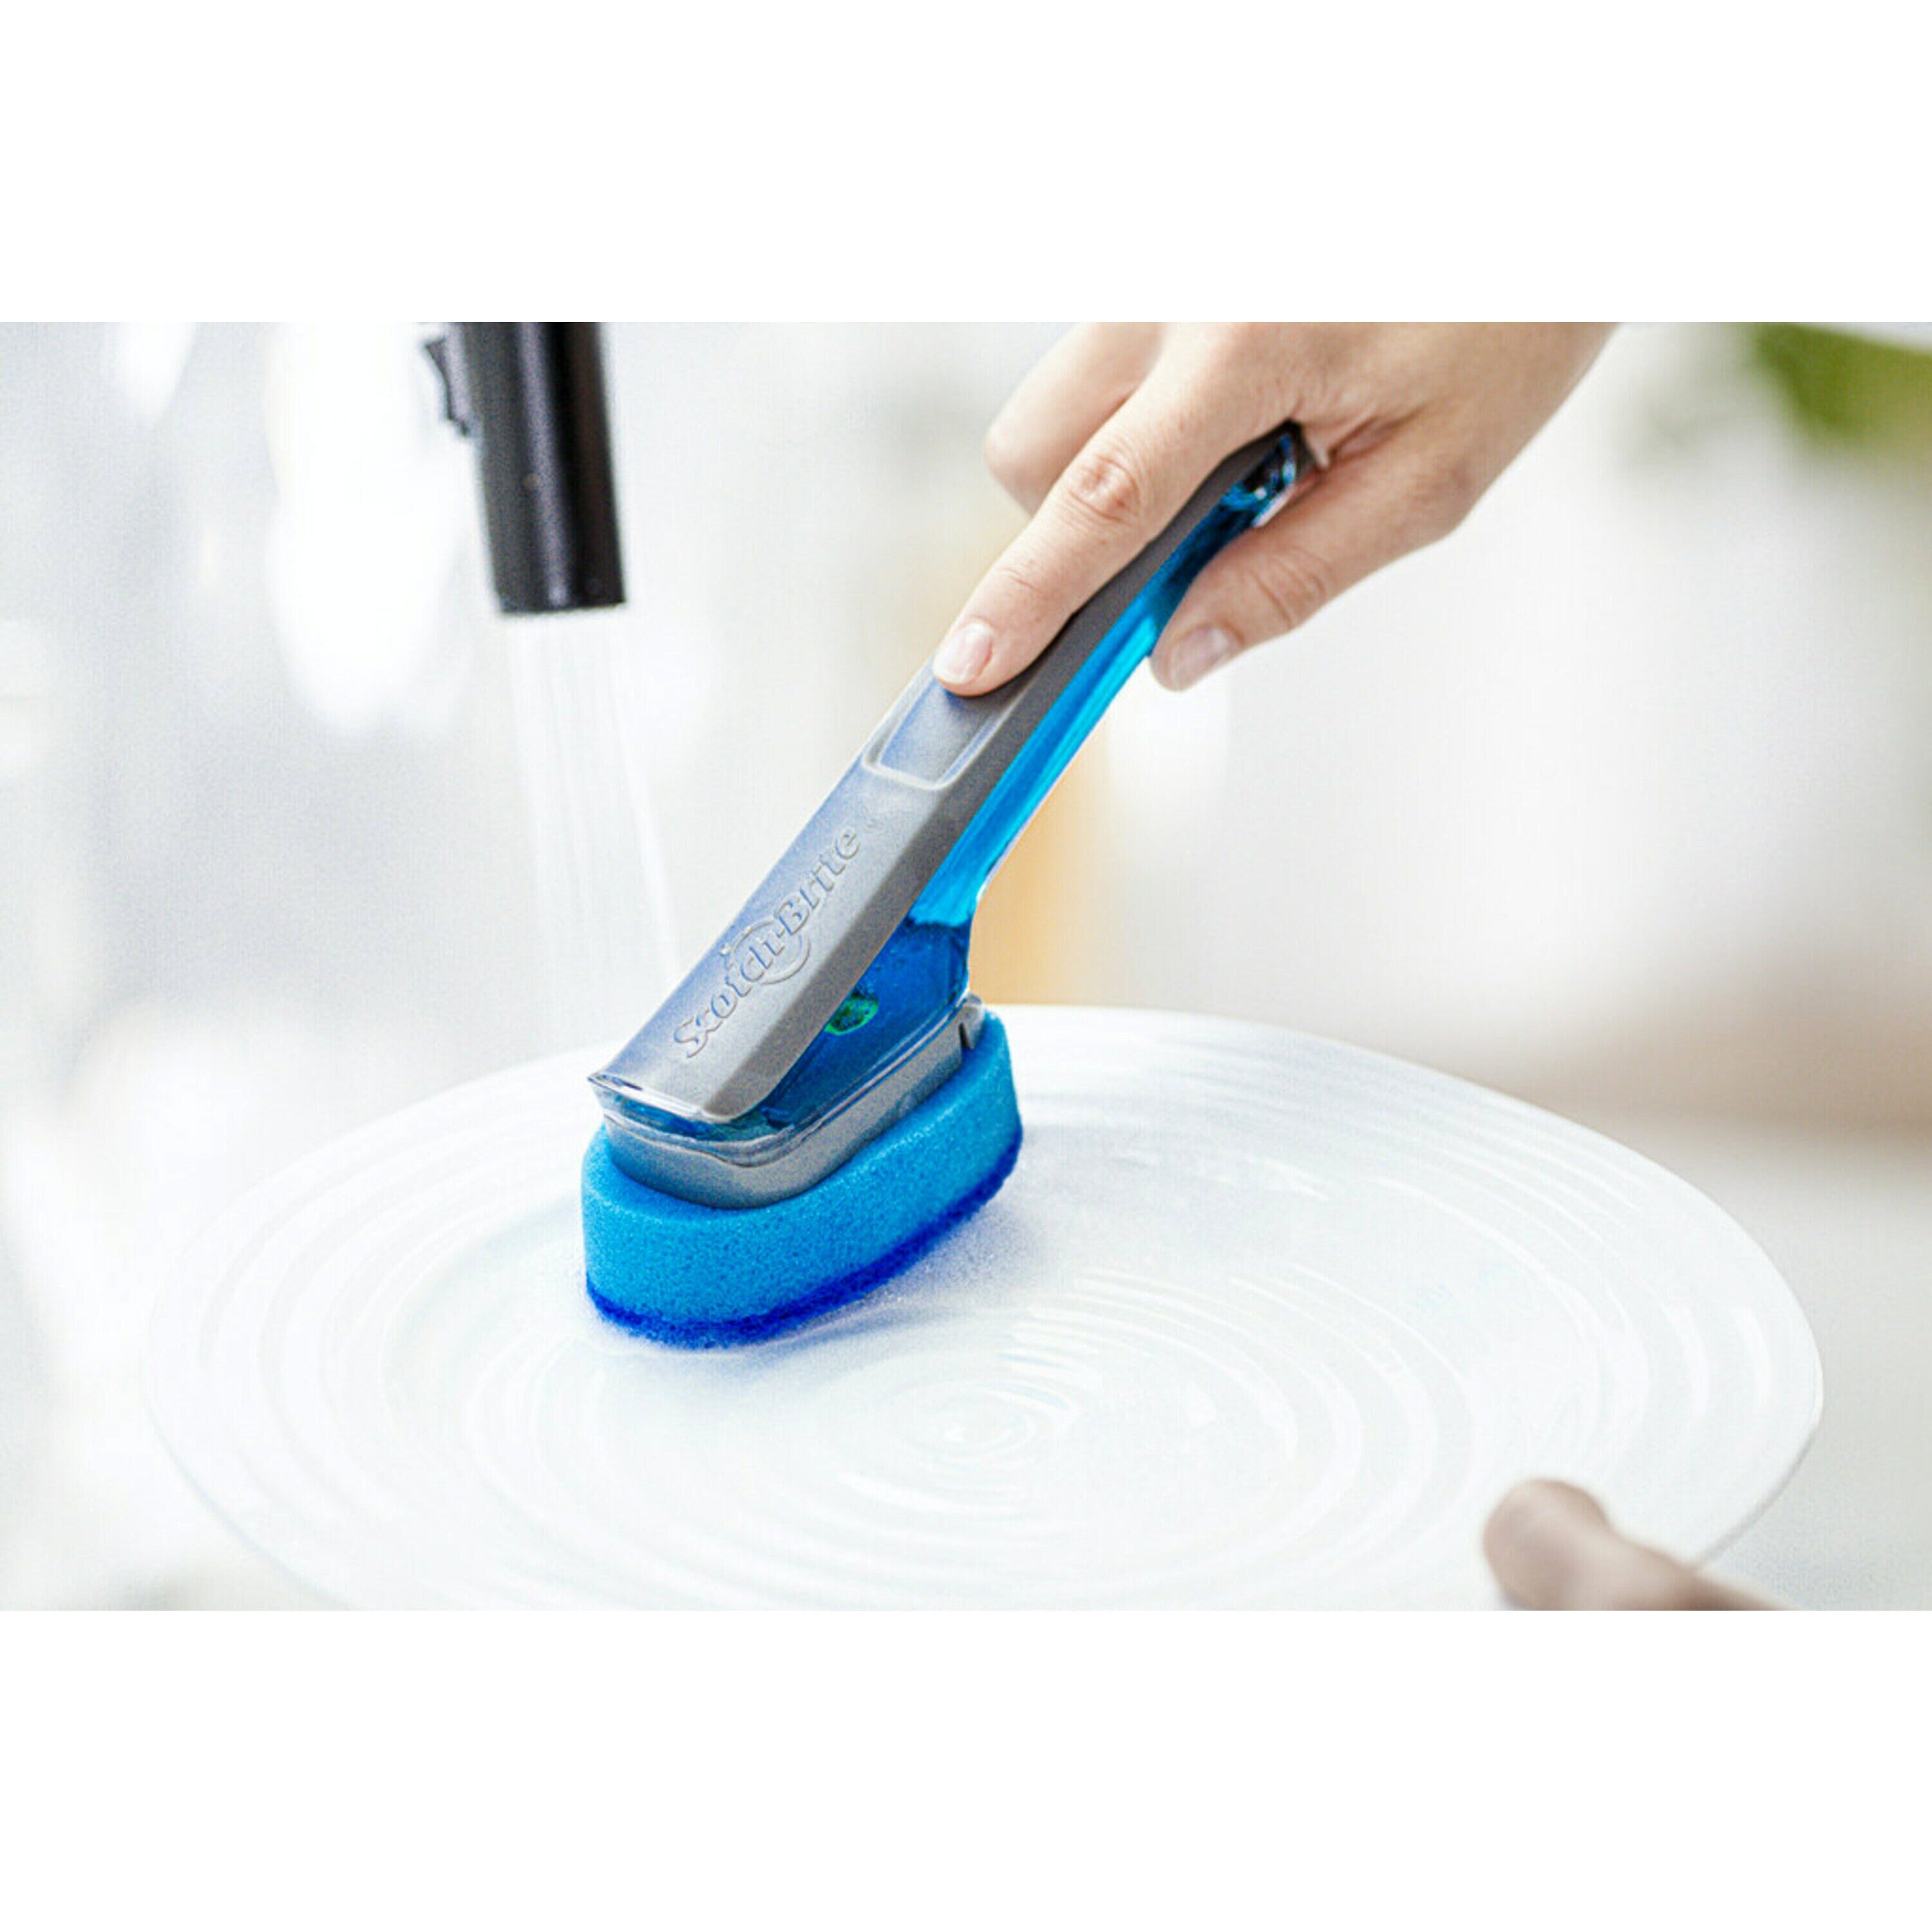 Advanced Soap Control Dishwand with Heavy Duty Scrubber 